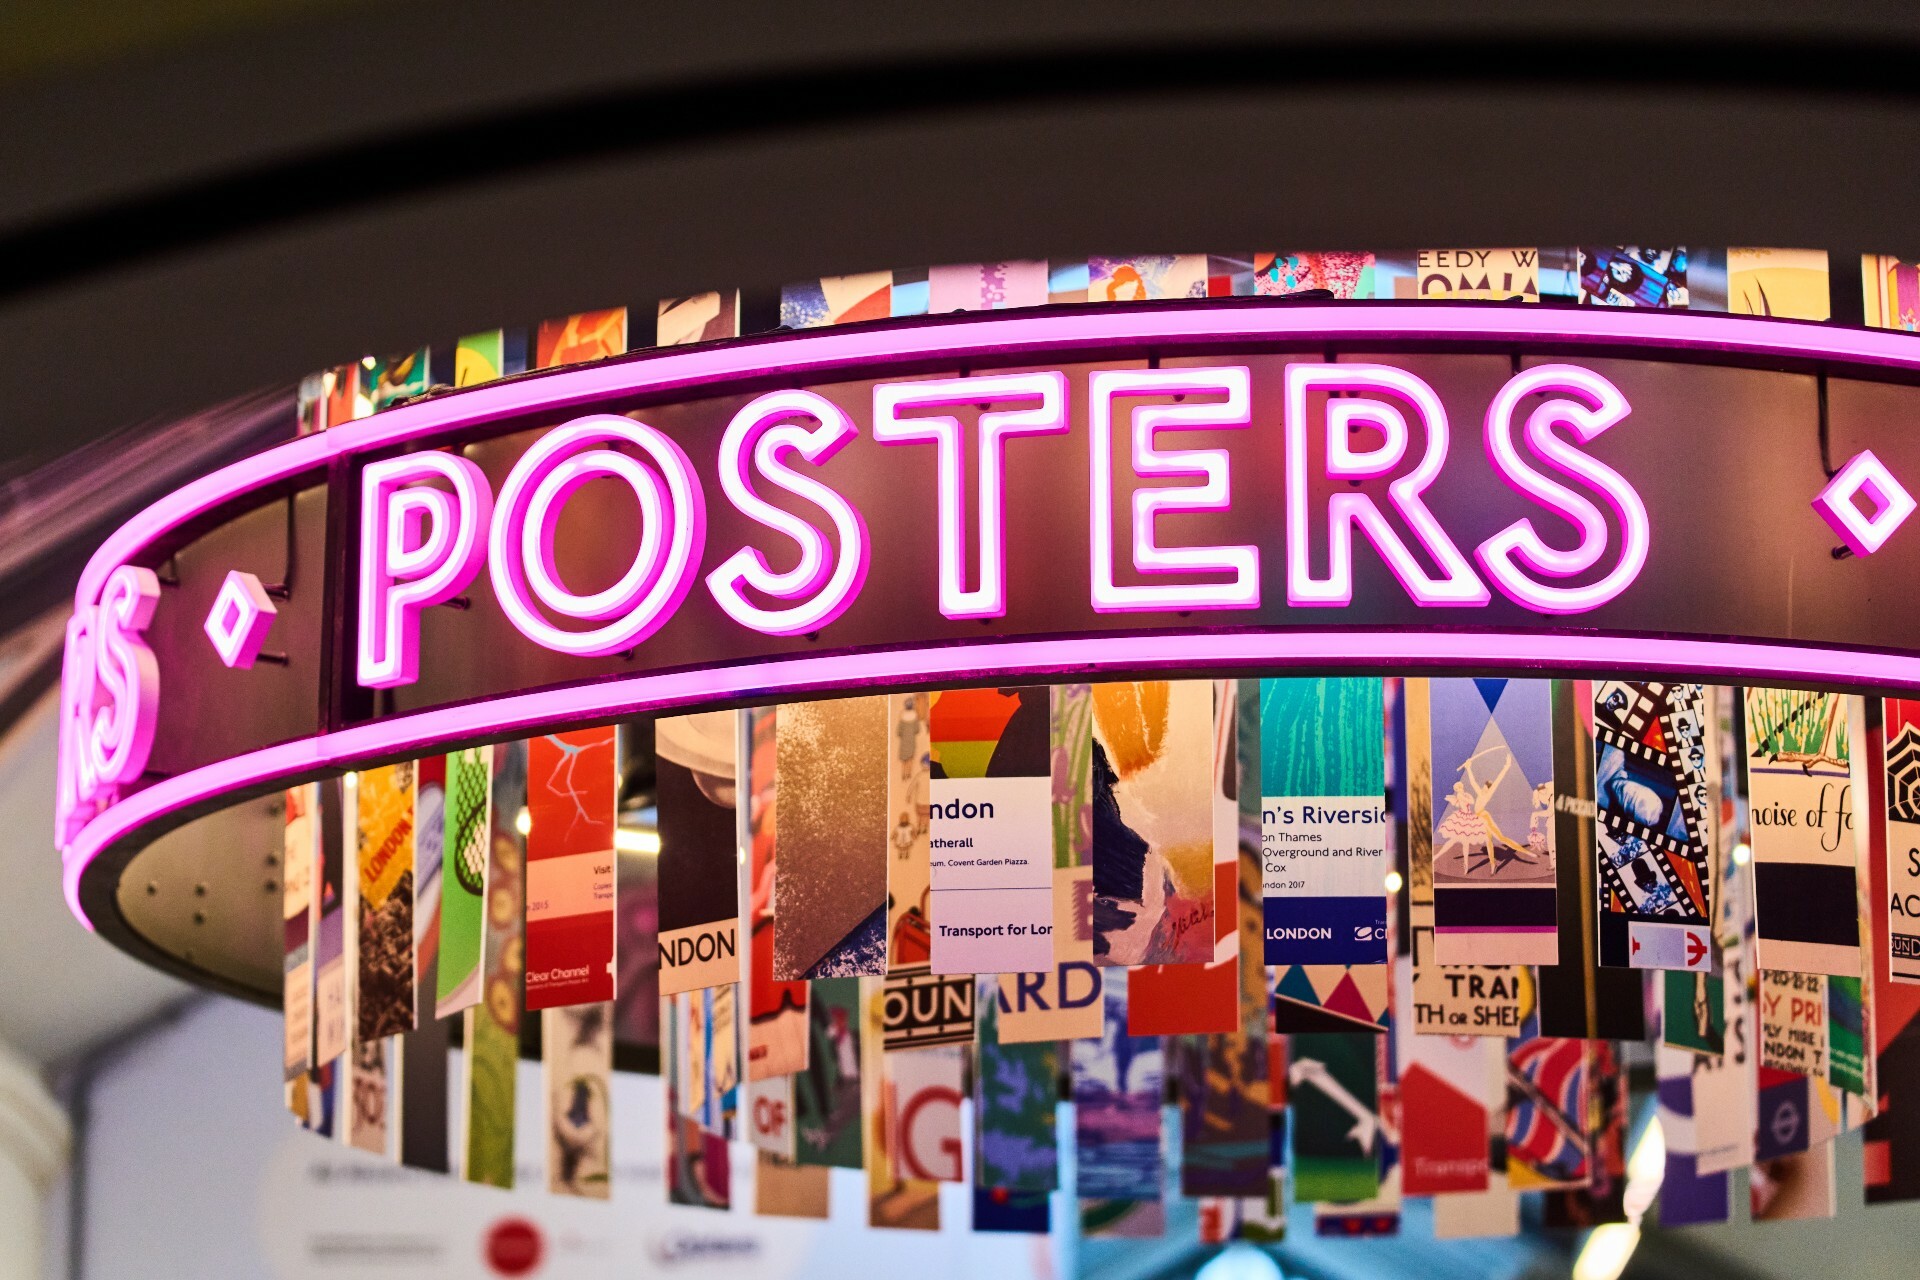 London now has an entire gallery dedicated to transport posters